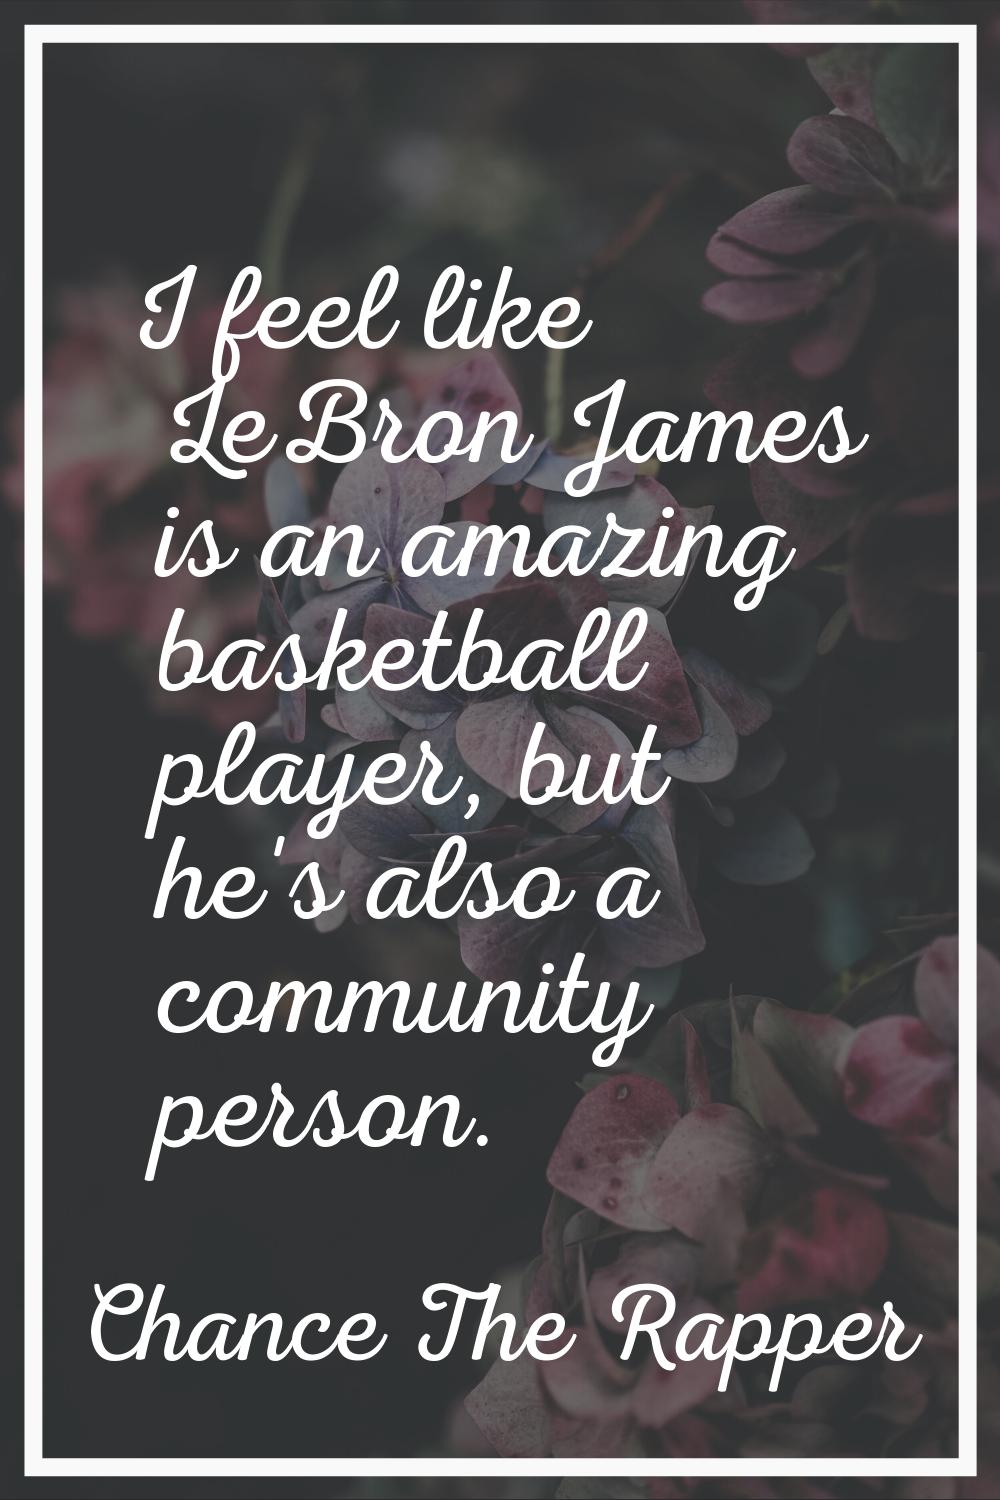 I feel like LeBron James is an amazing basketball player, but he's also a community person.